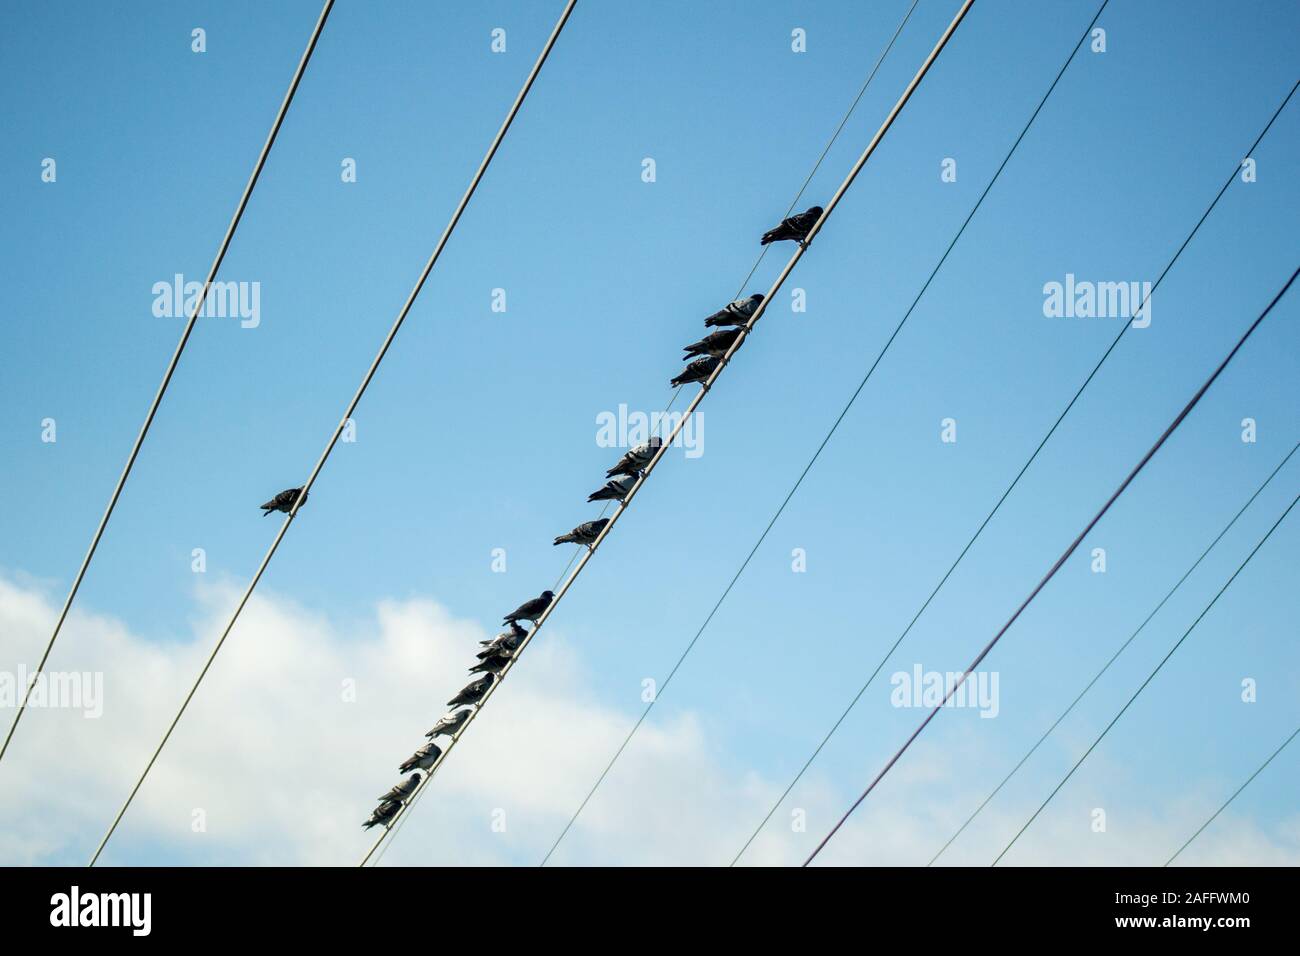 There's always one. Pigeons on electricity wires. One alone, fifteen together. Odd one out. Blue sky. Stock Photo